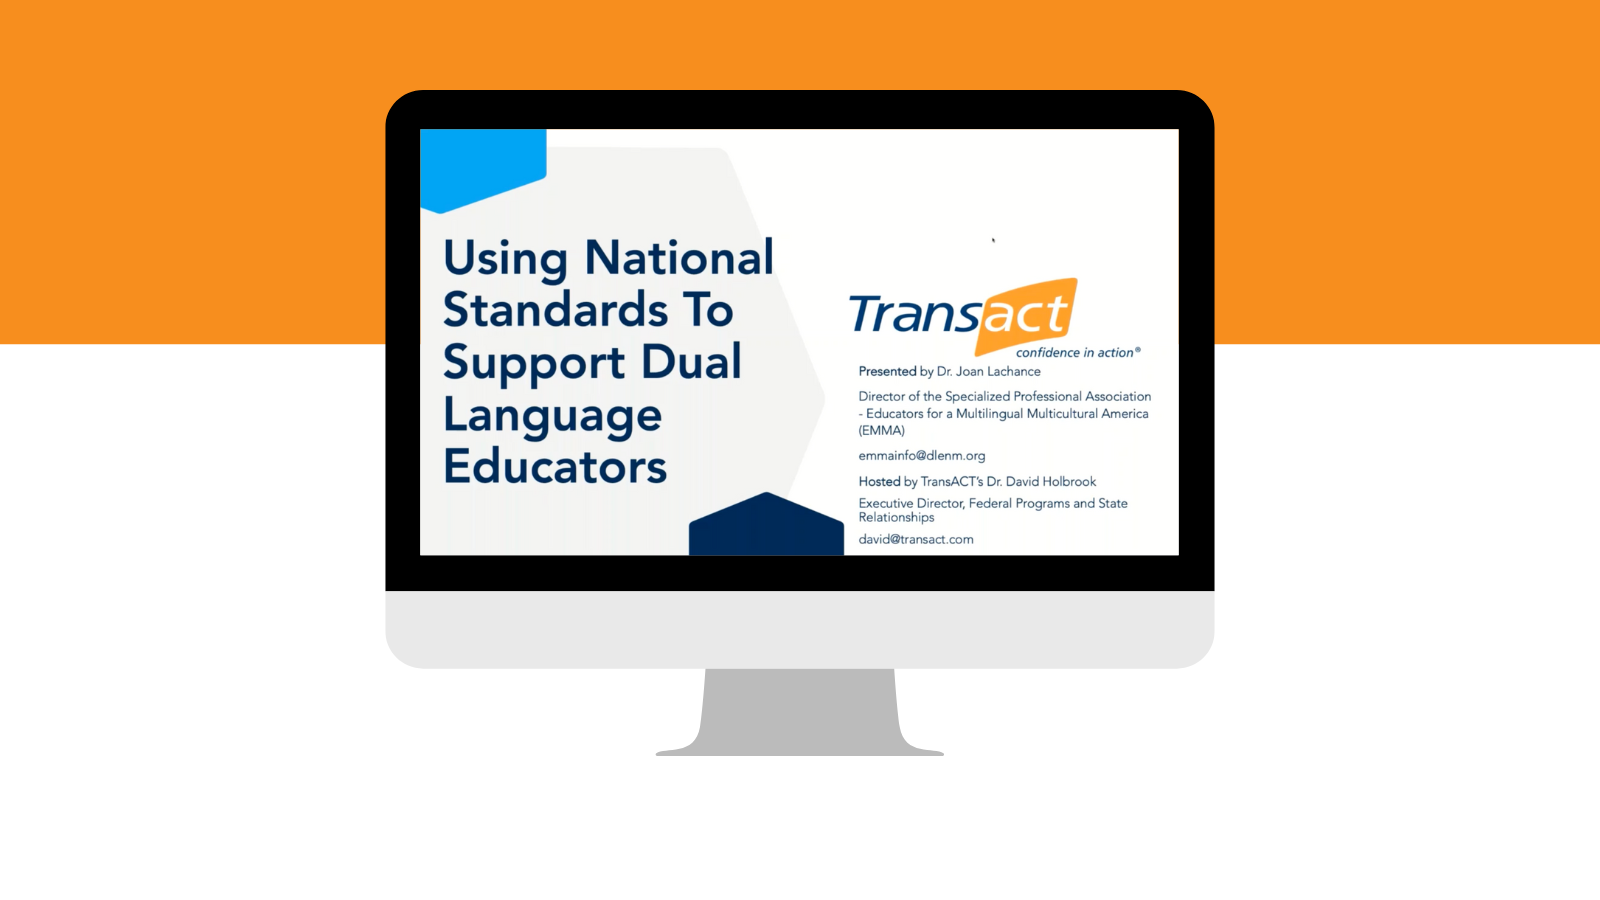 Using National Standards to Support Dual Language Educators